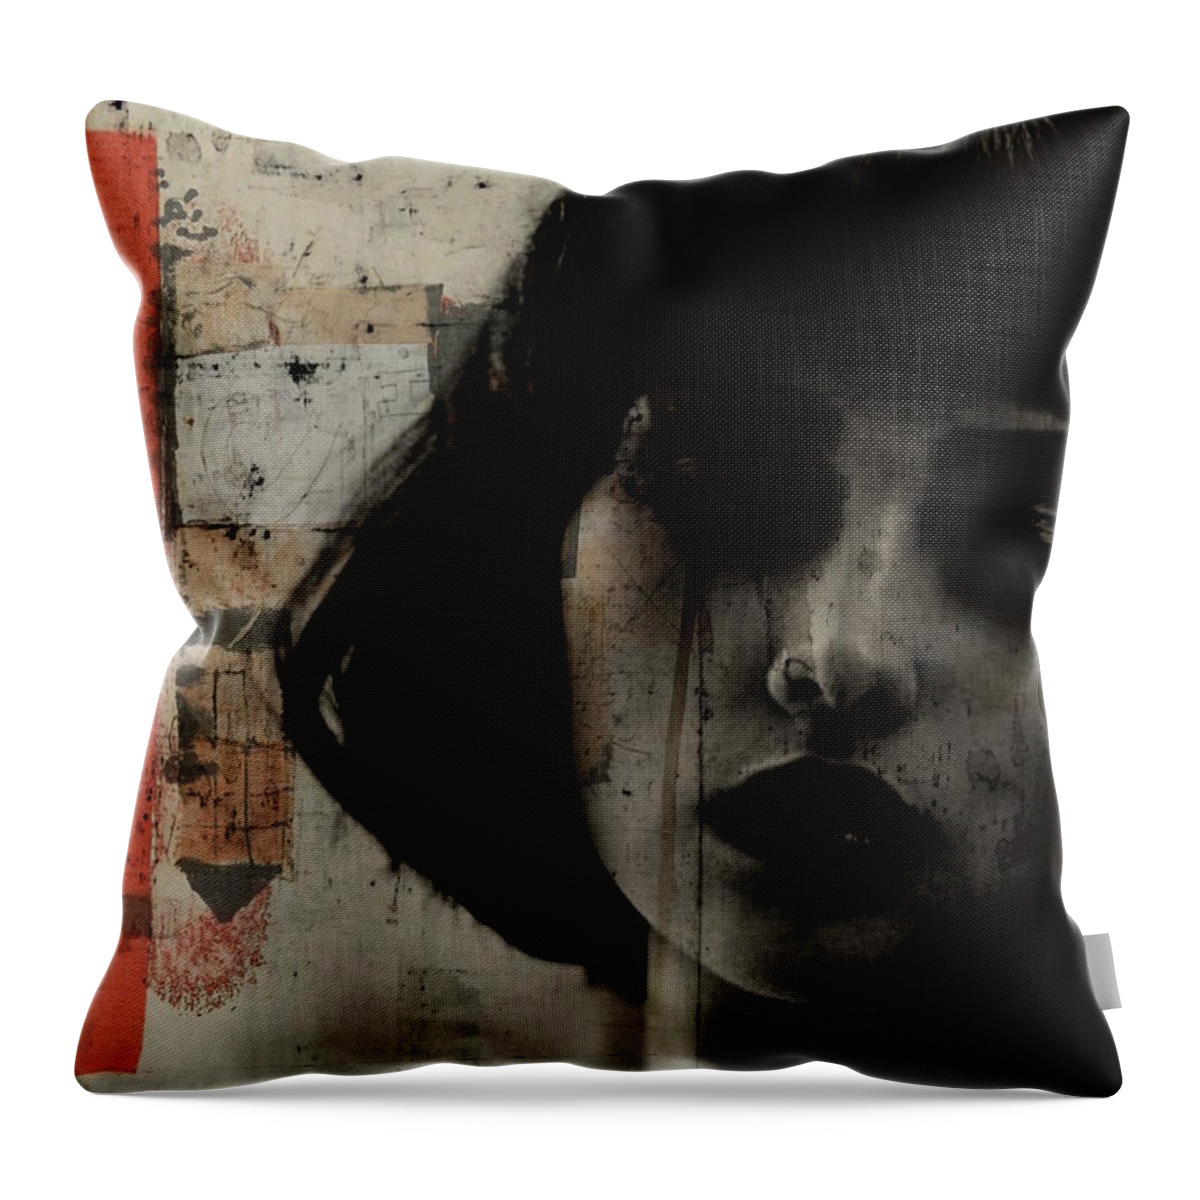 Woman Throw Pillow featuring the digital art Beware Of Darkness by Paul Lovering